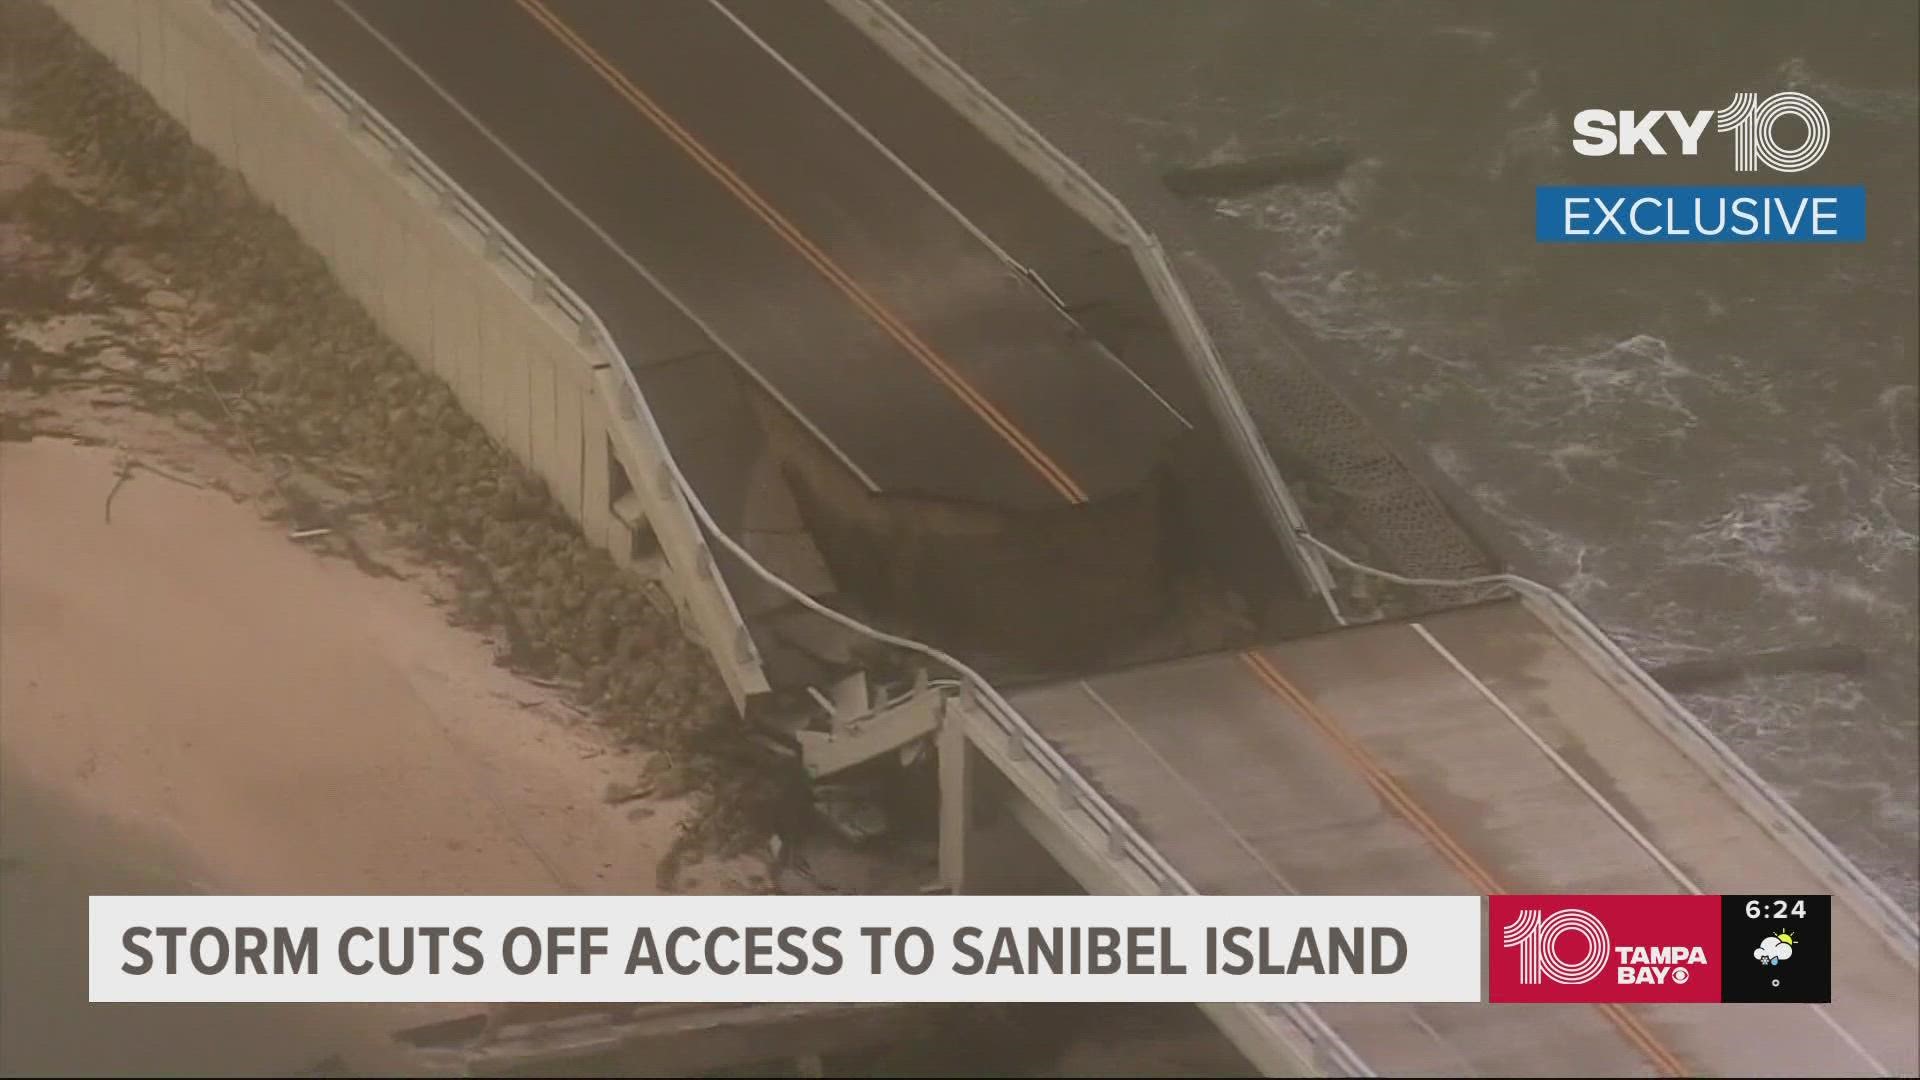 "Sanibel is forever changed." The priority is to help those stranded.